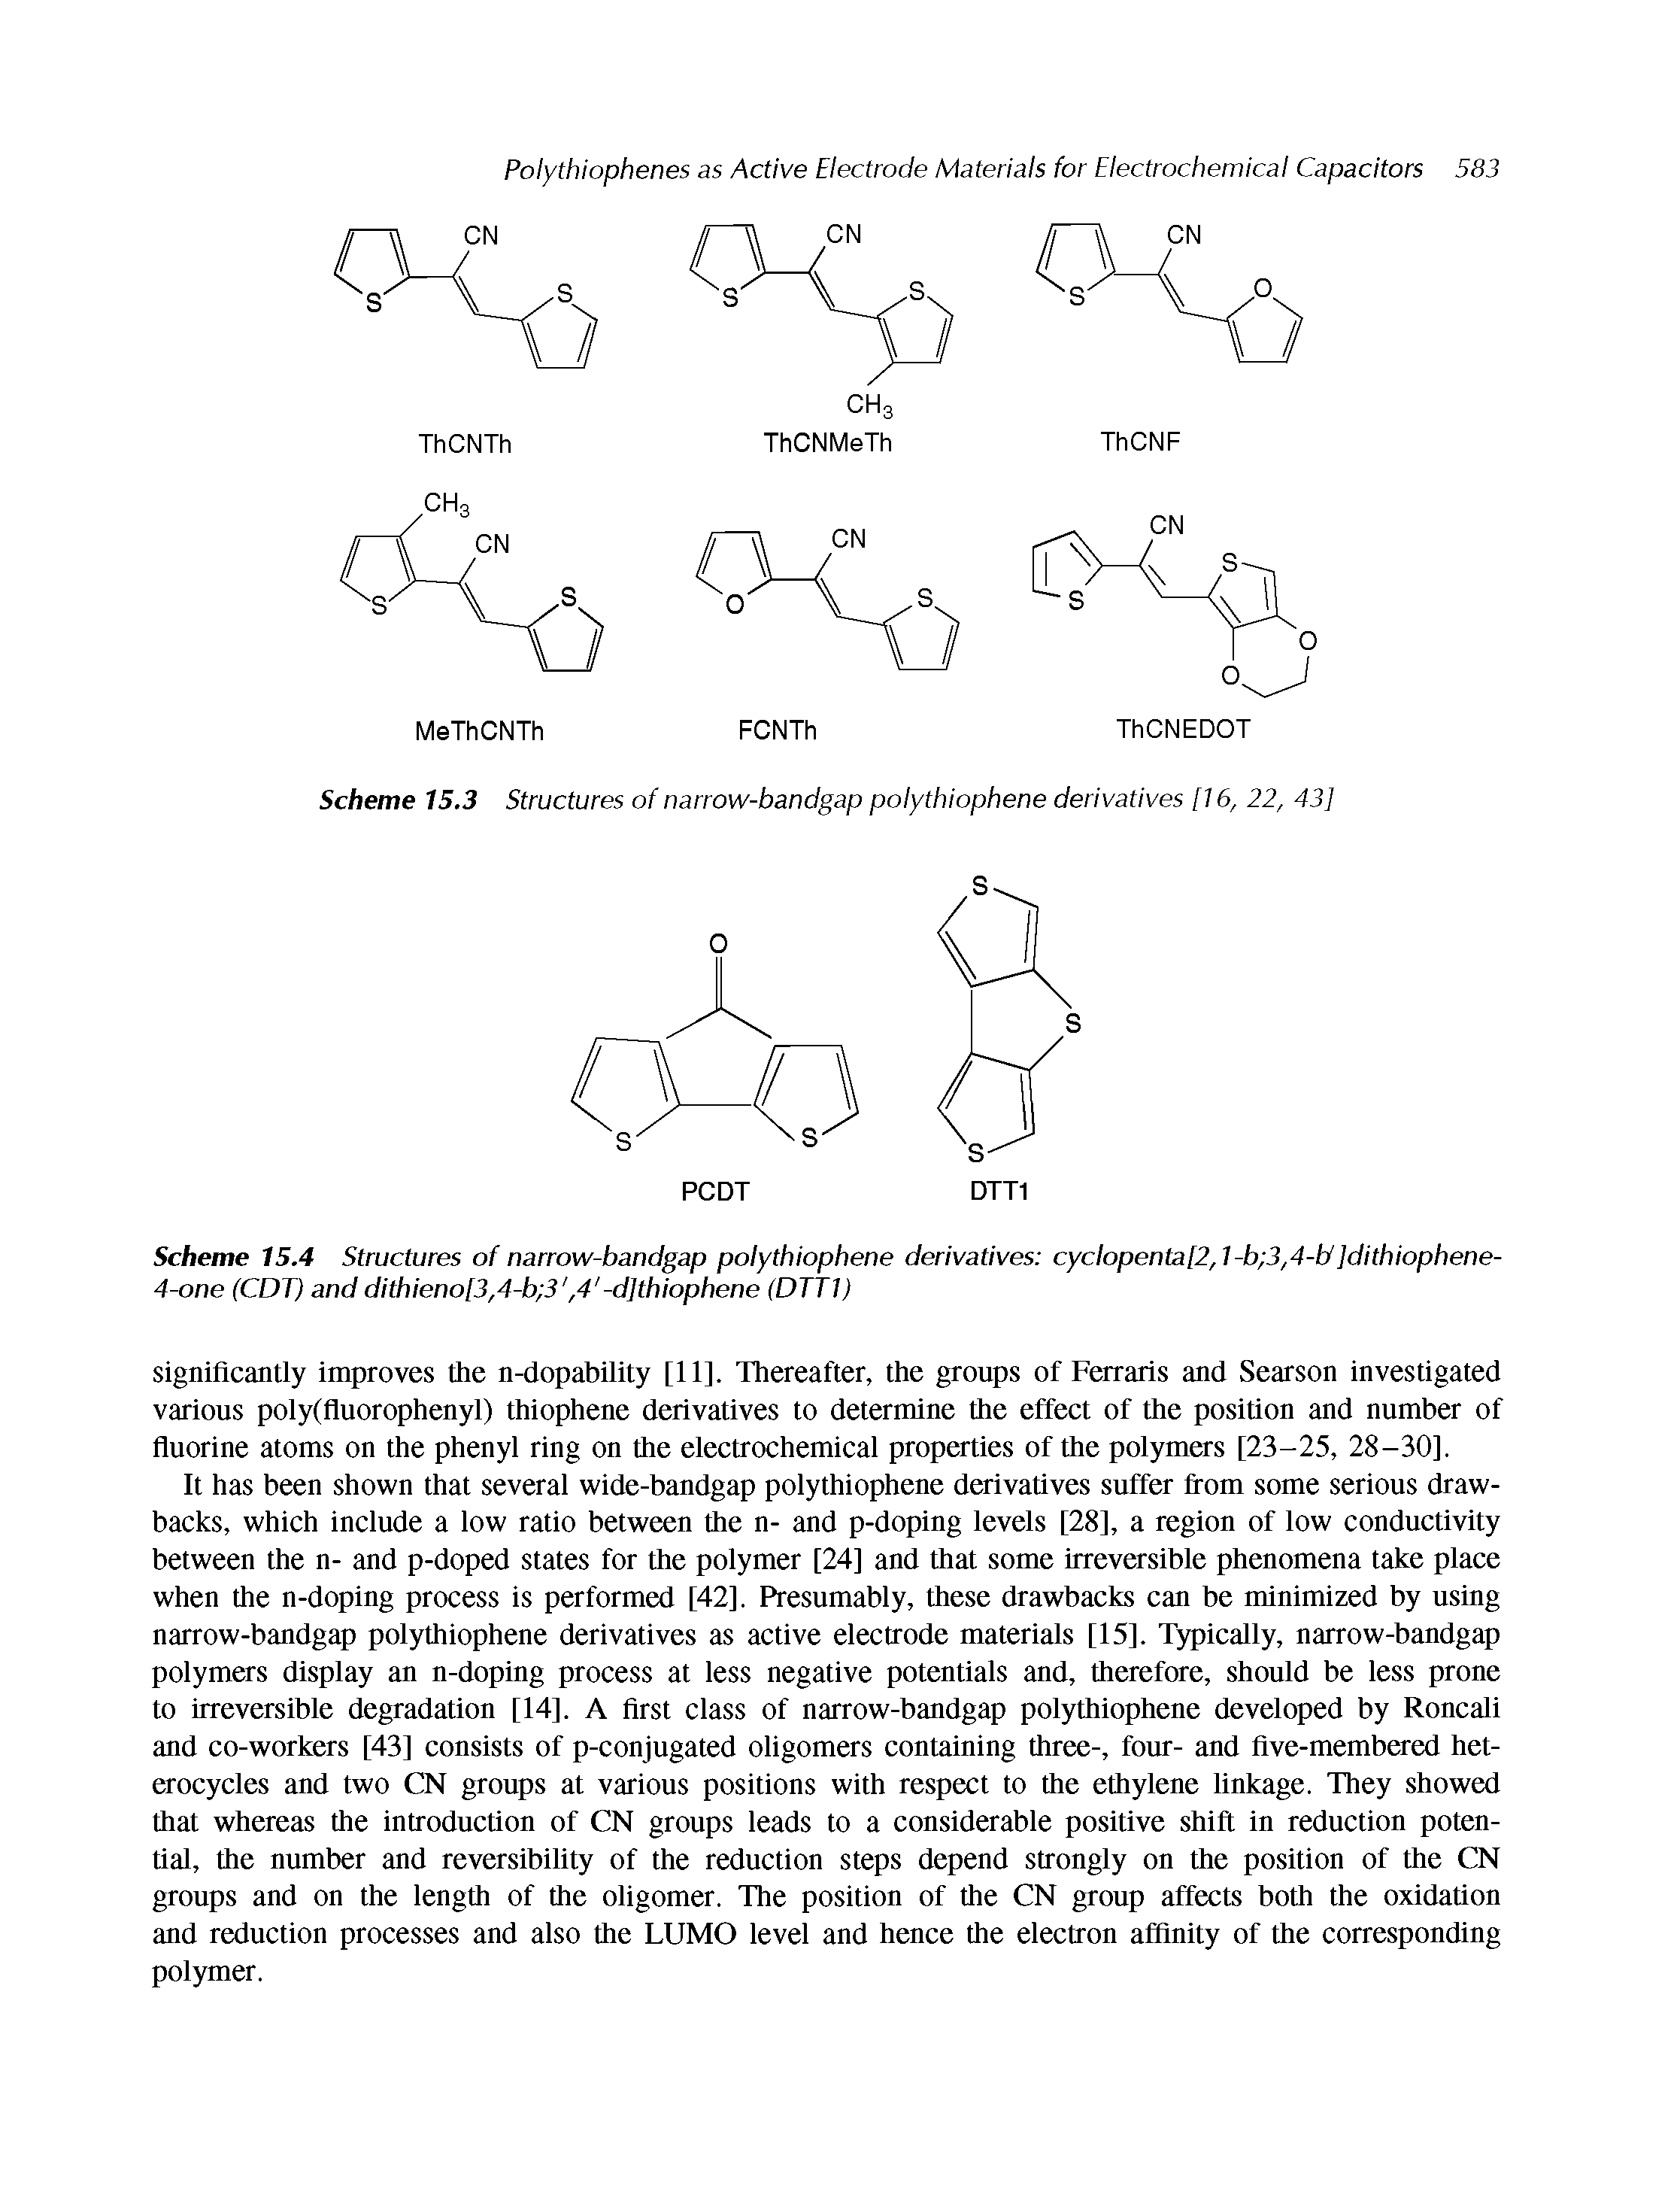 Scheme 15.4 Structures of narrow-bandgap polythiophene derivatives cyclopenta[2,1-b 3,4-bf Jdithiophene-4-one (CDT) and dithieno[3,4-b 3, 4 -d]thiophene (DTTI)...